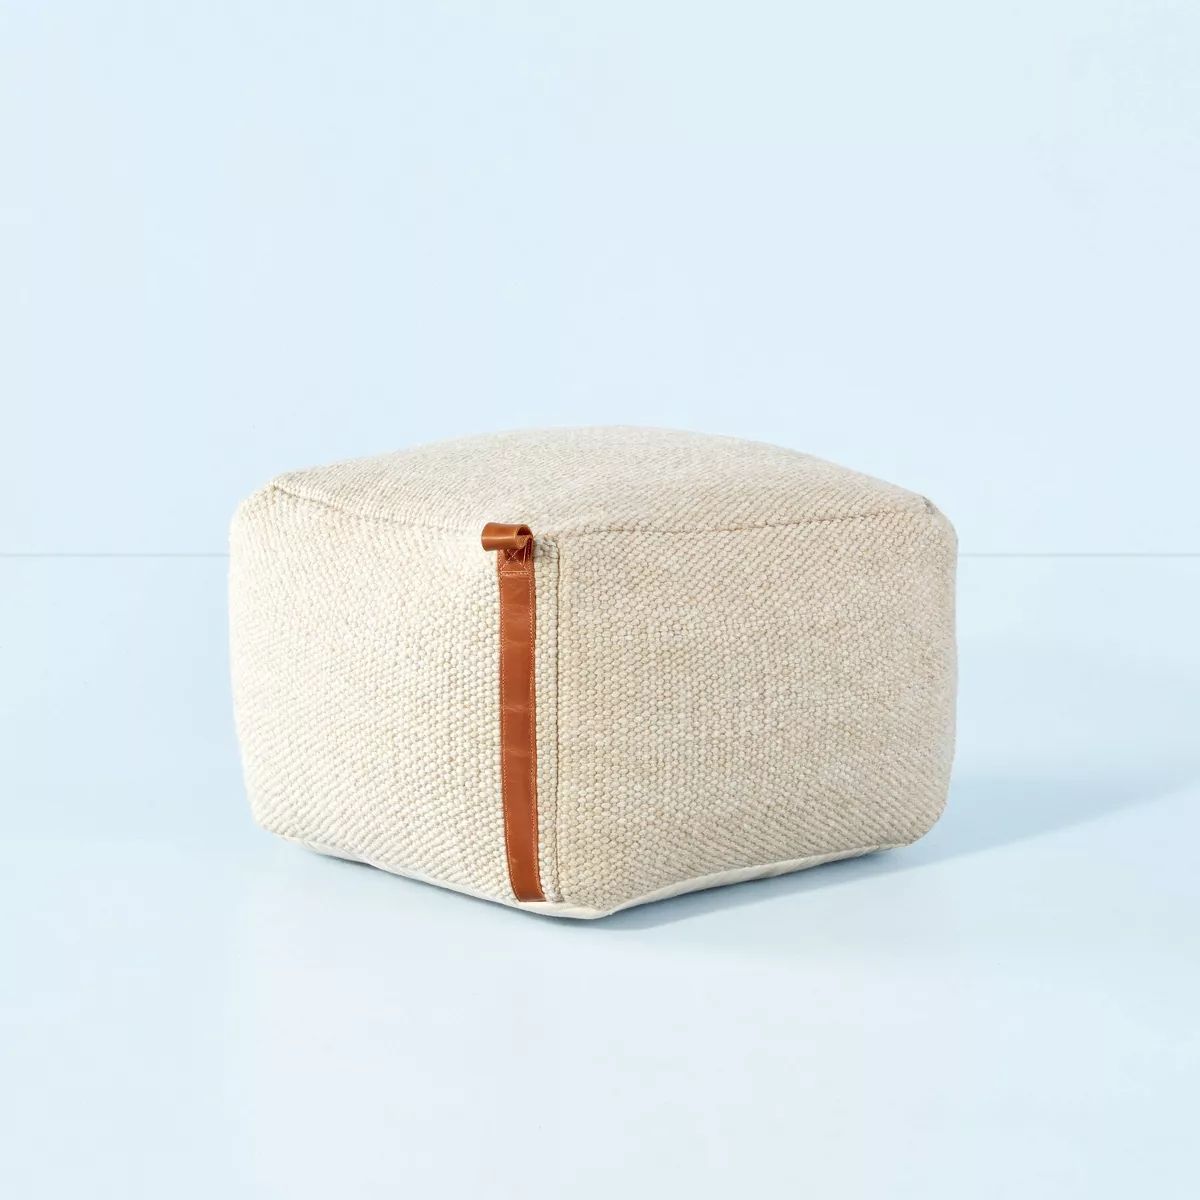 Hand-Woven Pouf Ottoman with Leather Trim - Hearth & Hand™ with Magnolia | Target